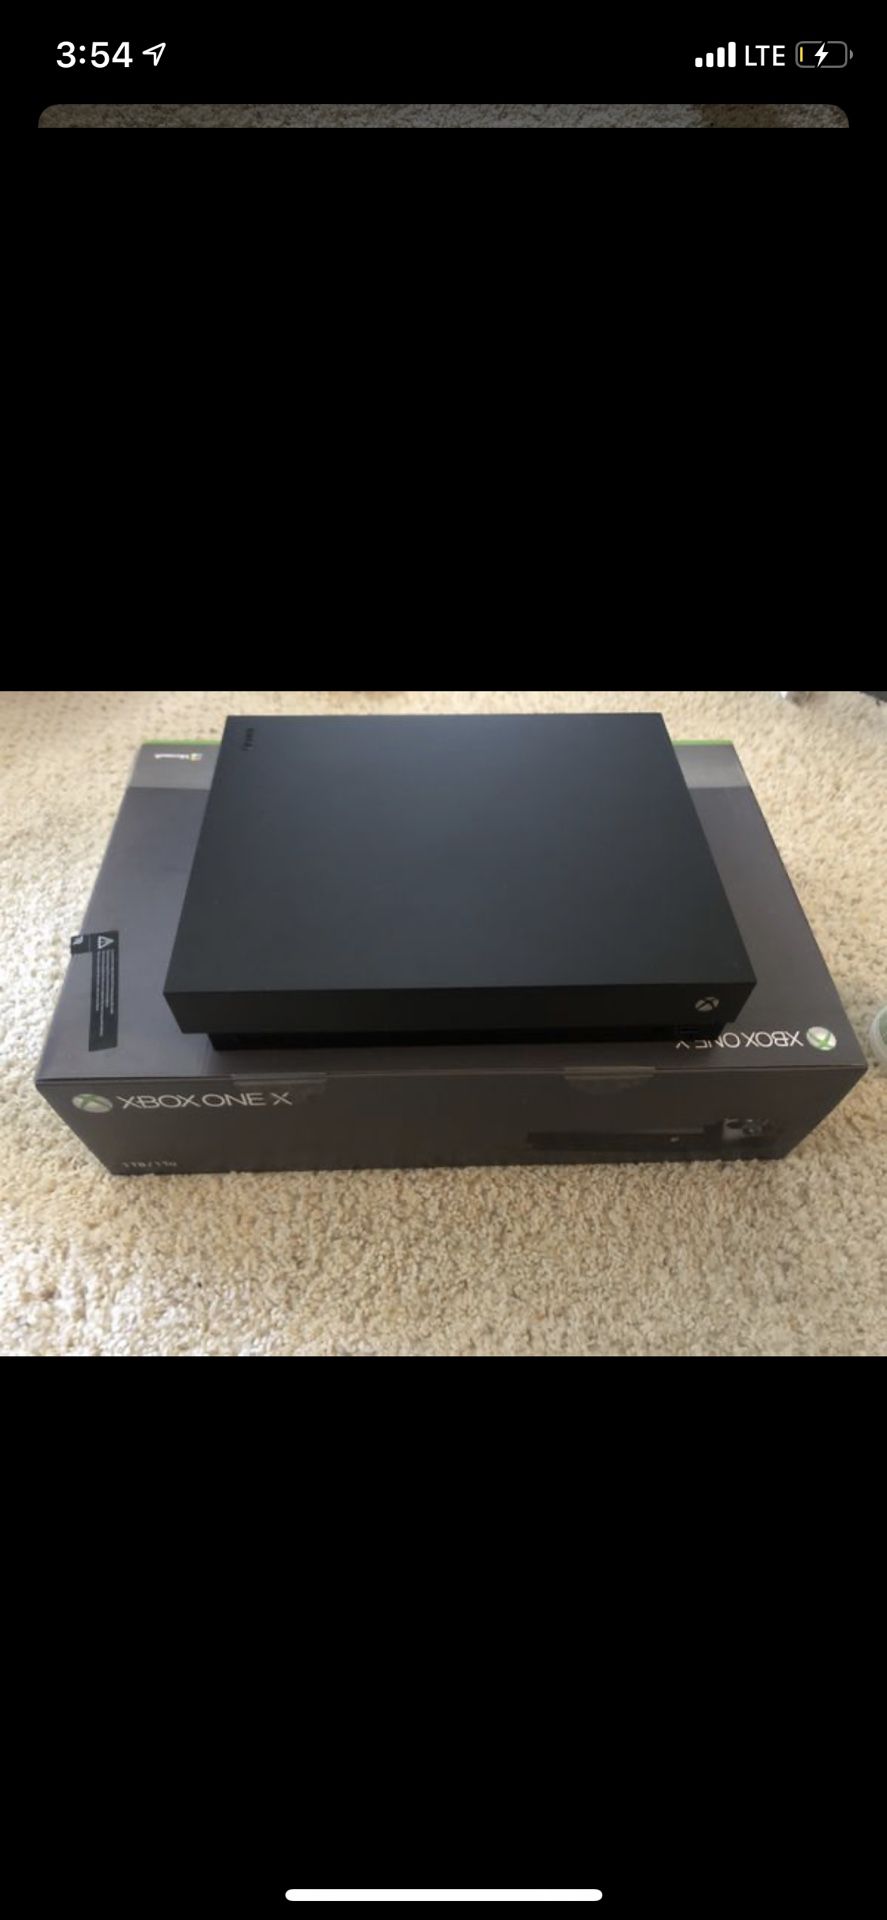 Xbox One X 1TB W/ $50 GIFT CARD AND 15 Games(in description)